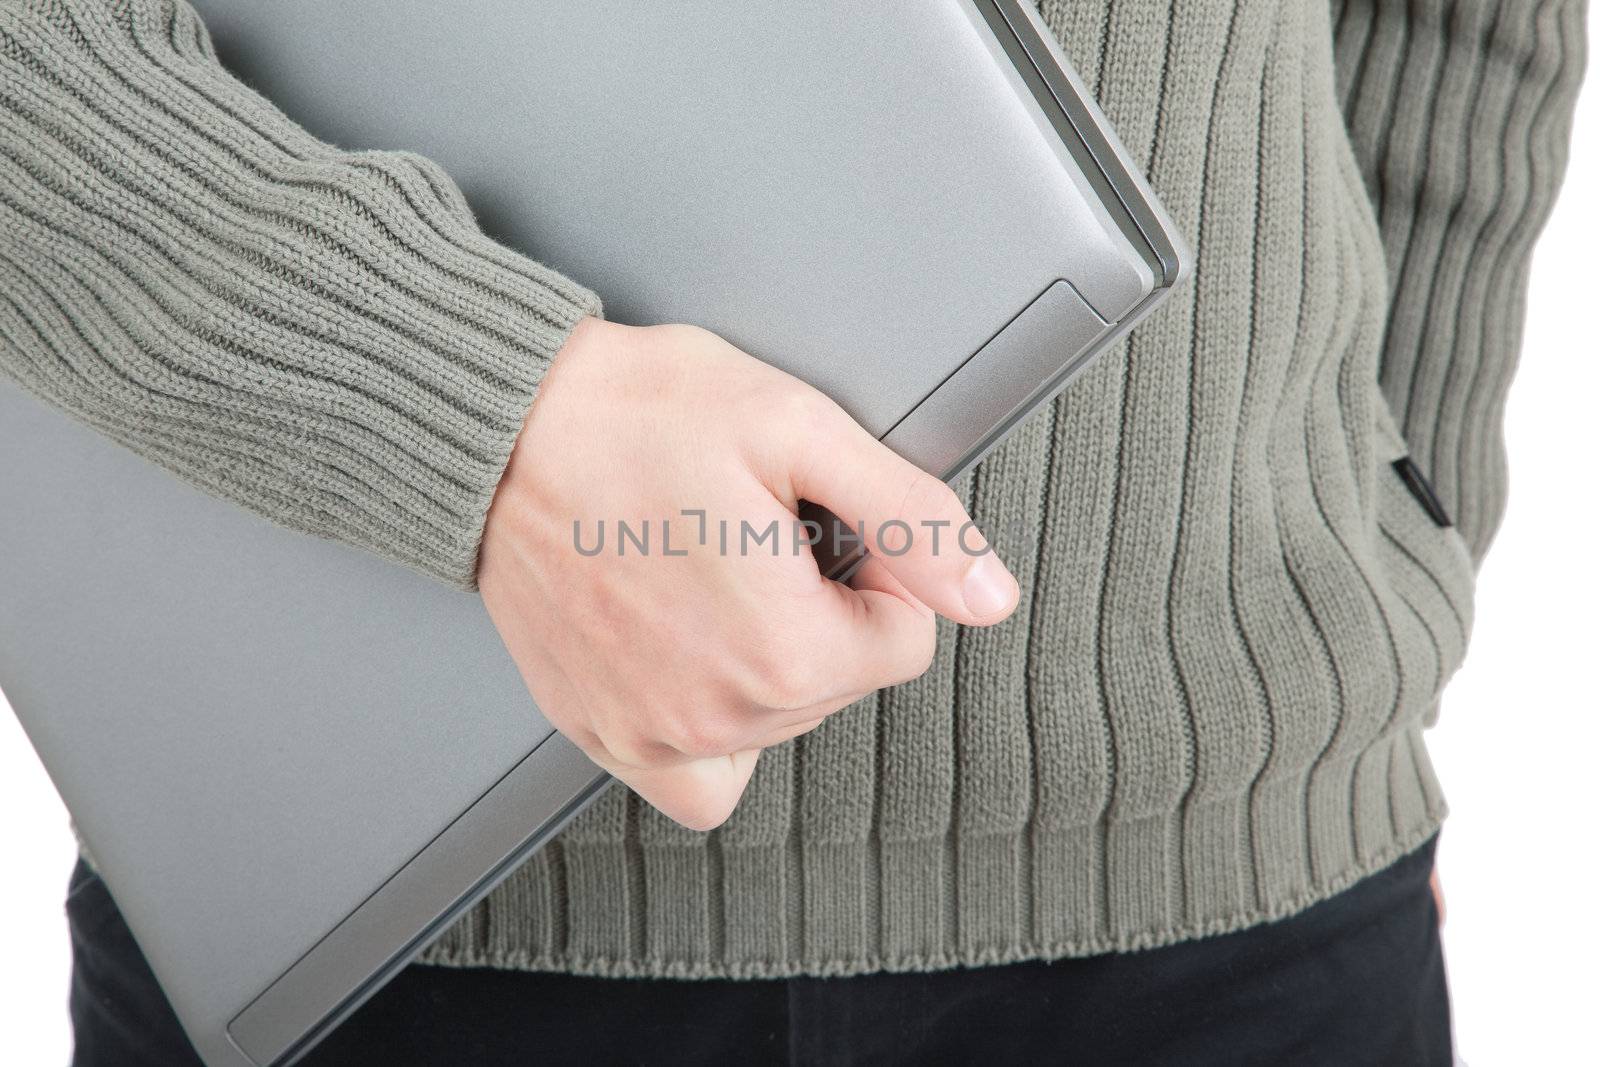 young man  handing  laptop on white background